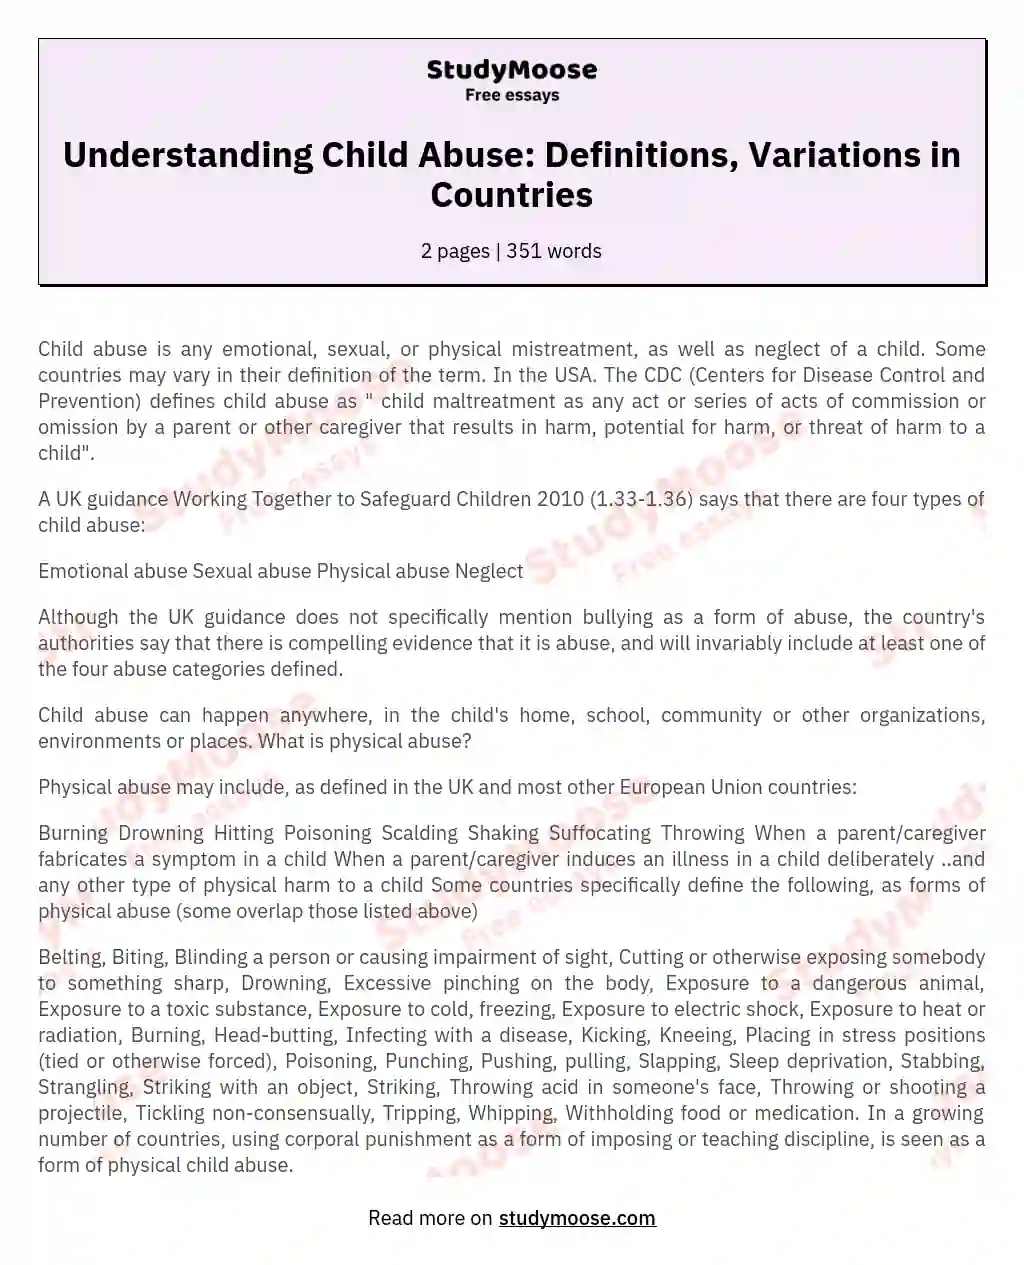 Understanding Child Abuse: Definitions, Variations in Countries essay